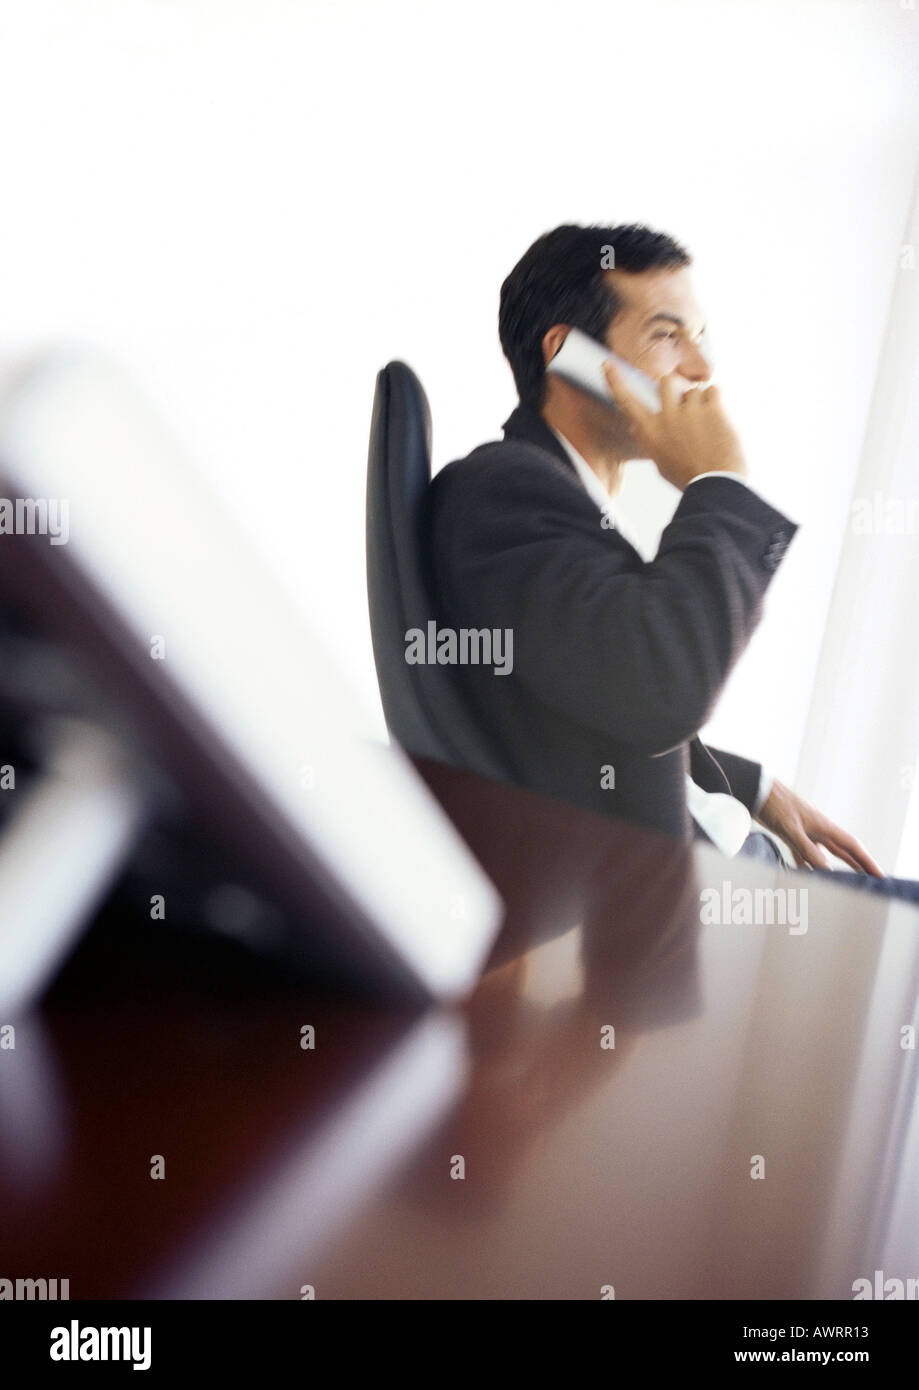 Businessman using phone, side view Banque D'Images